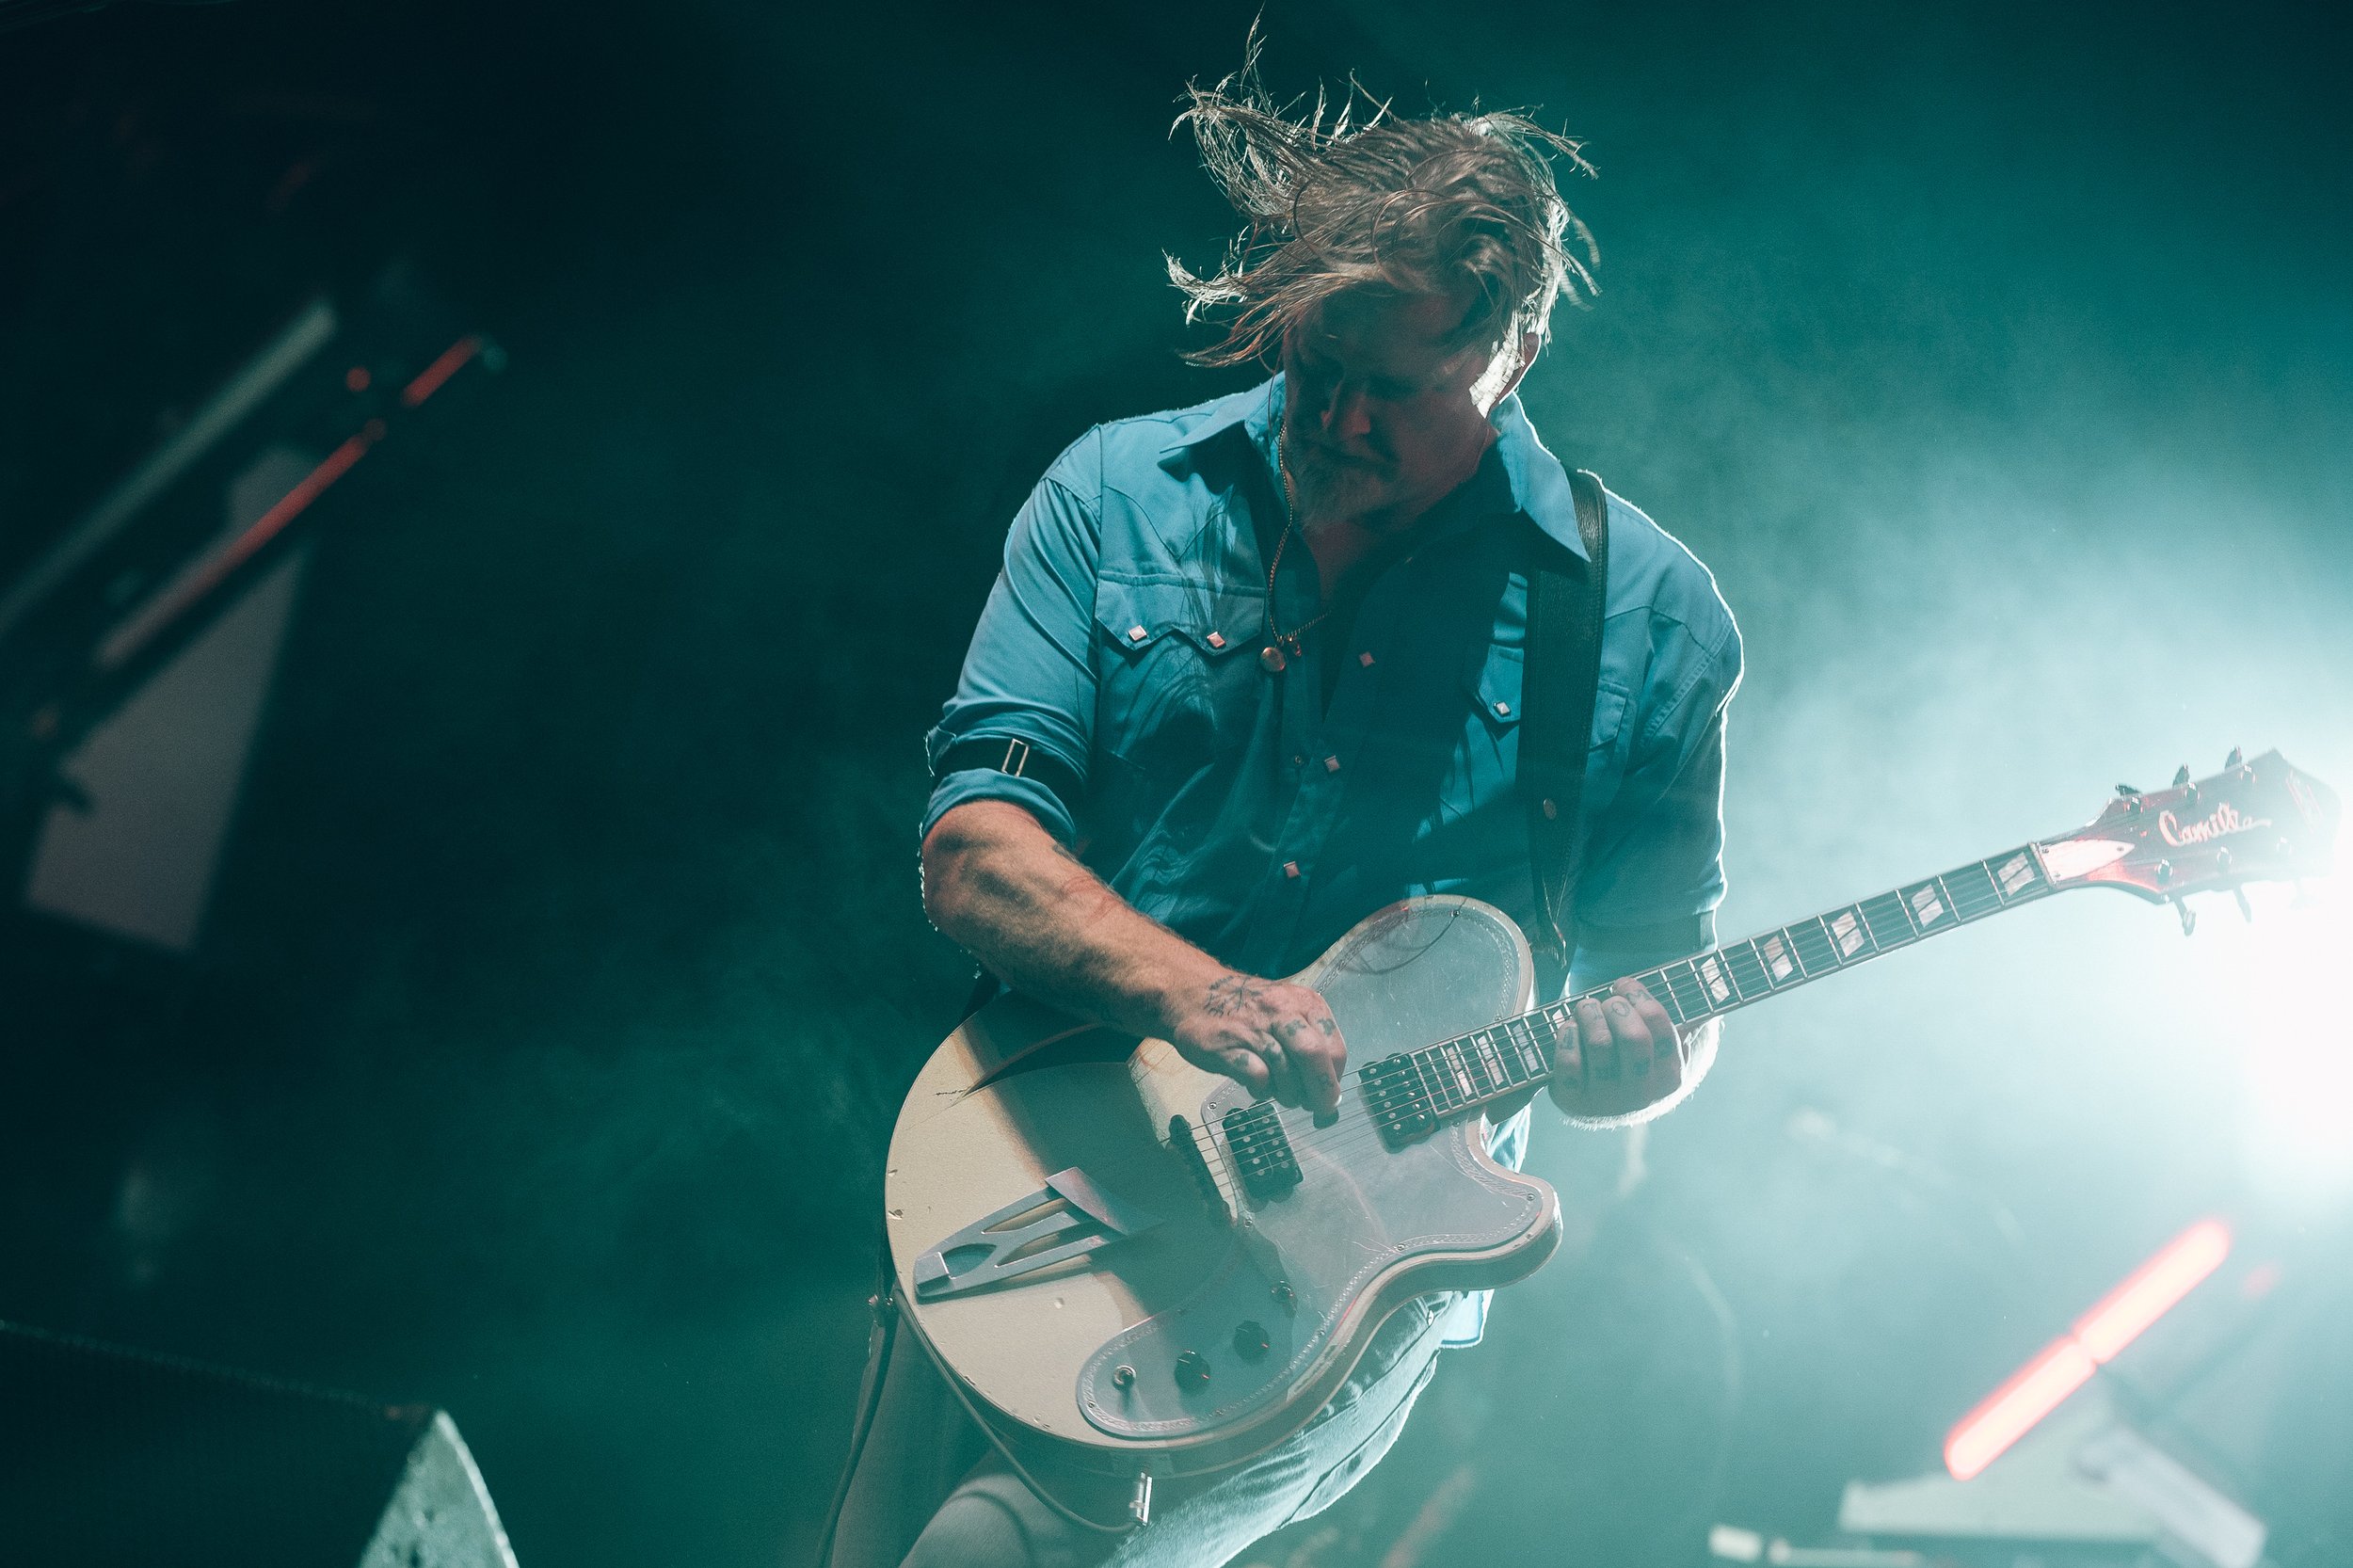 20230707_NOS_ALIVE_QUEENS_OF_THE_STONE_AGE_JOAOSILVAGD_08640.jpg